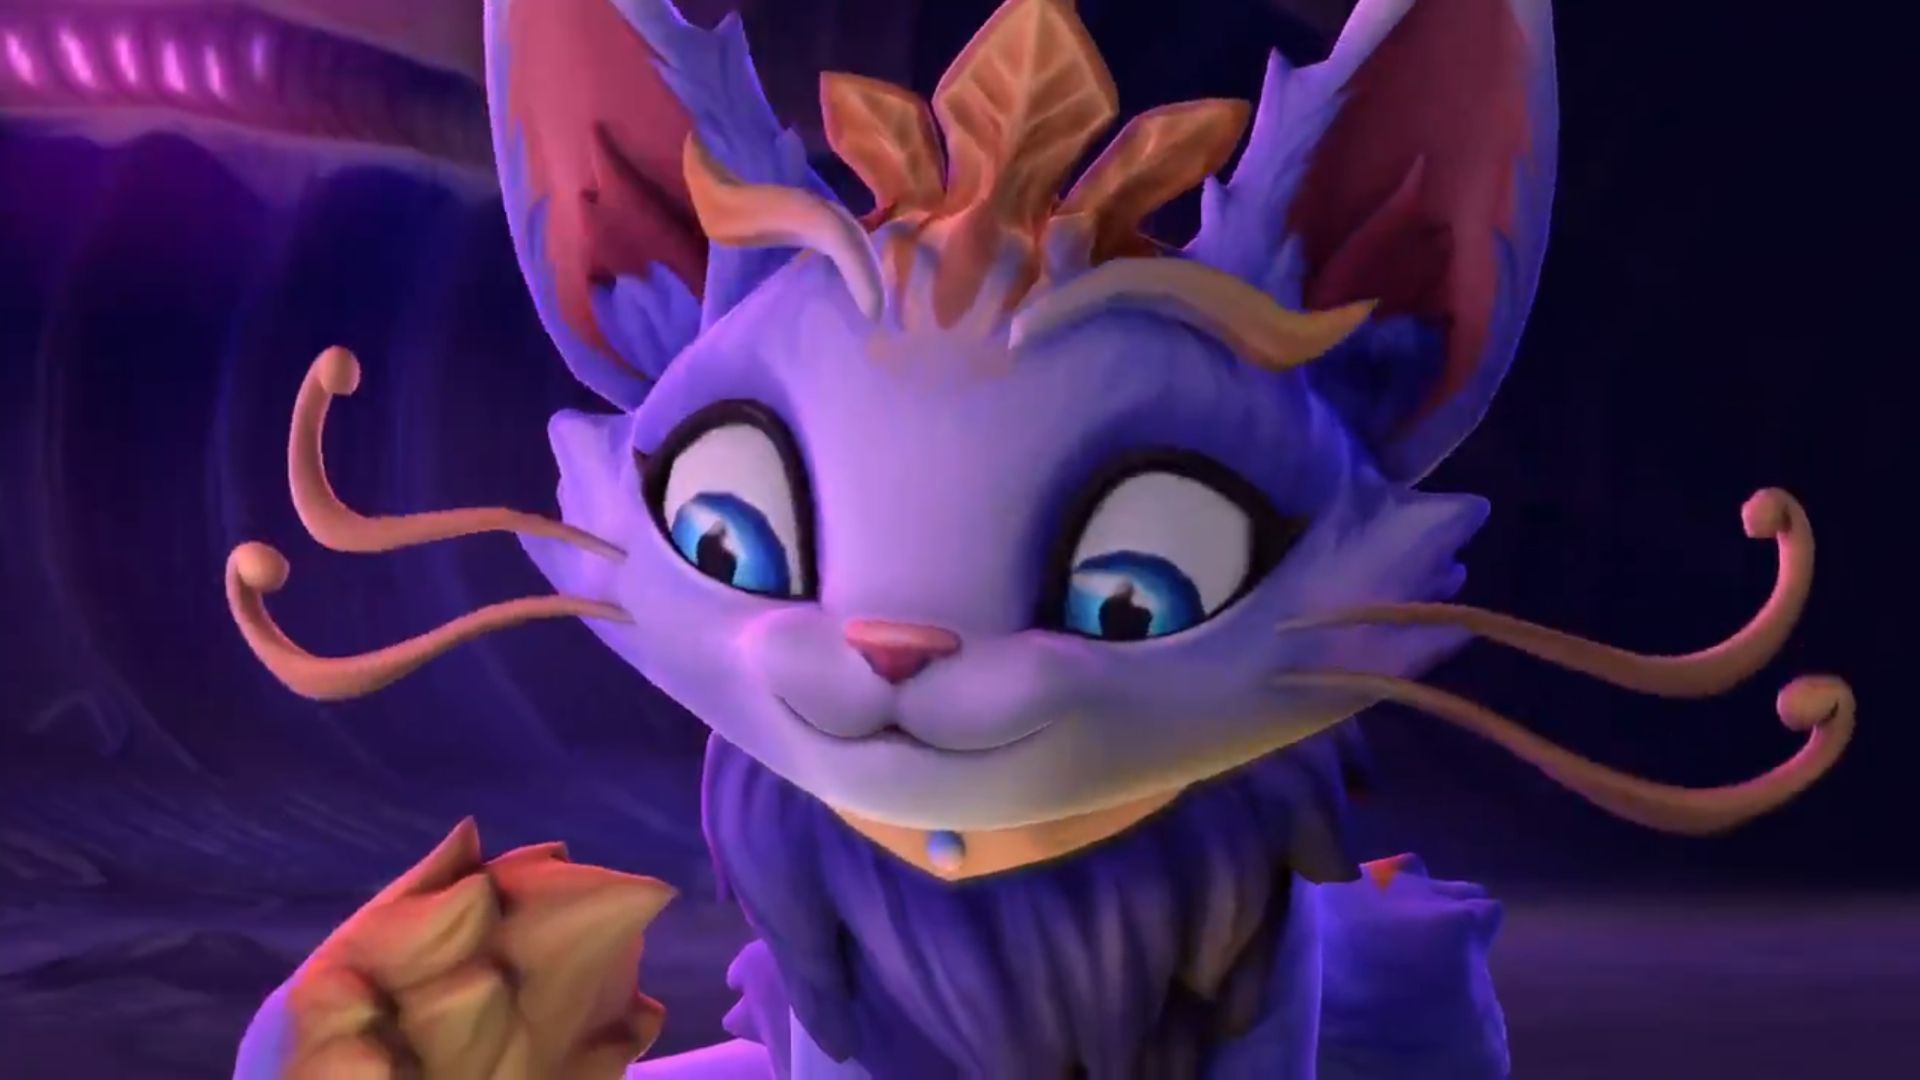 Here’s your first look at League of Legends’ adorable new cat hero